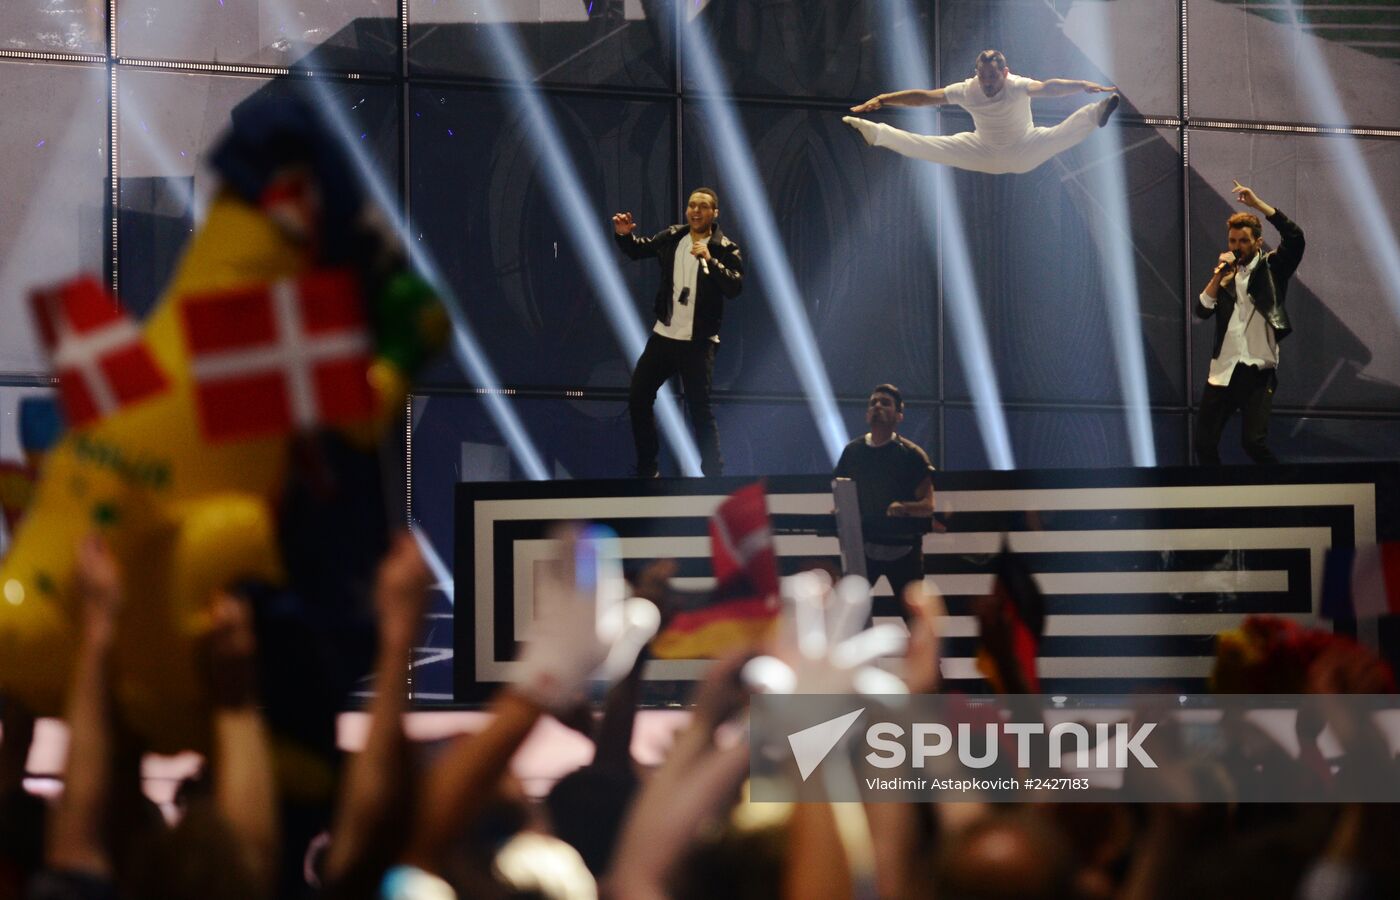 Eurovision Song Contest 2014 finals